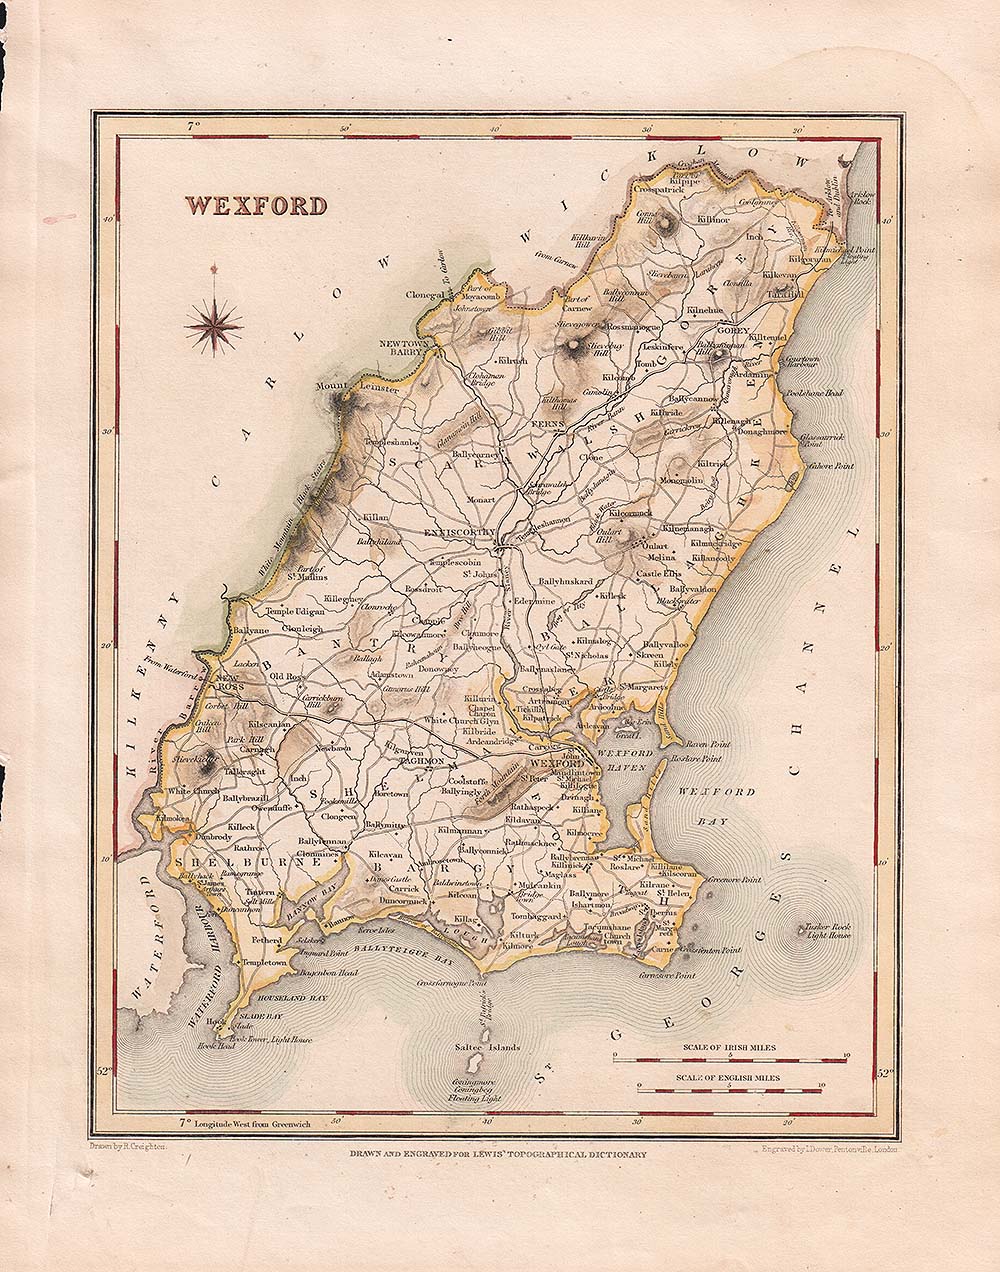 Wexford  -  Lewis Atlas comprising the Counties of Ireland